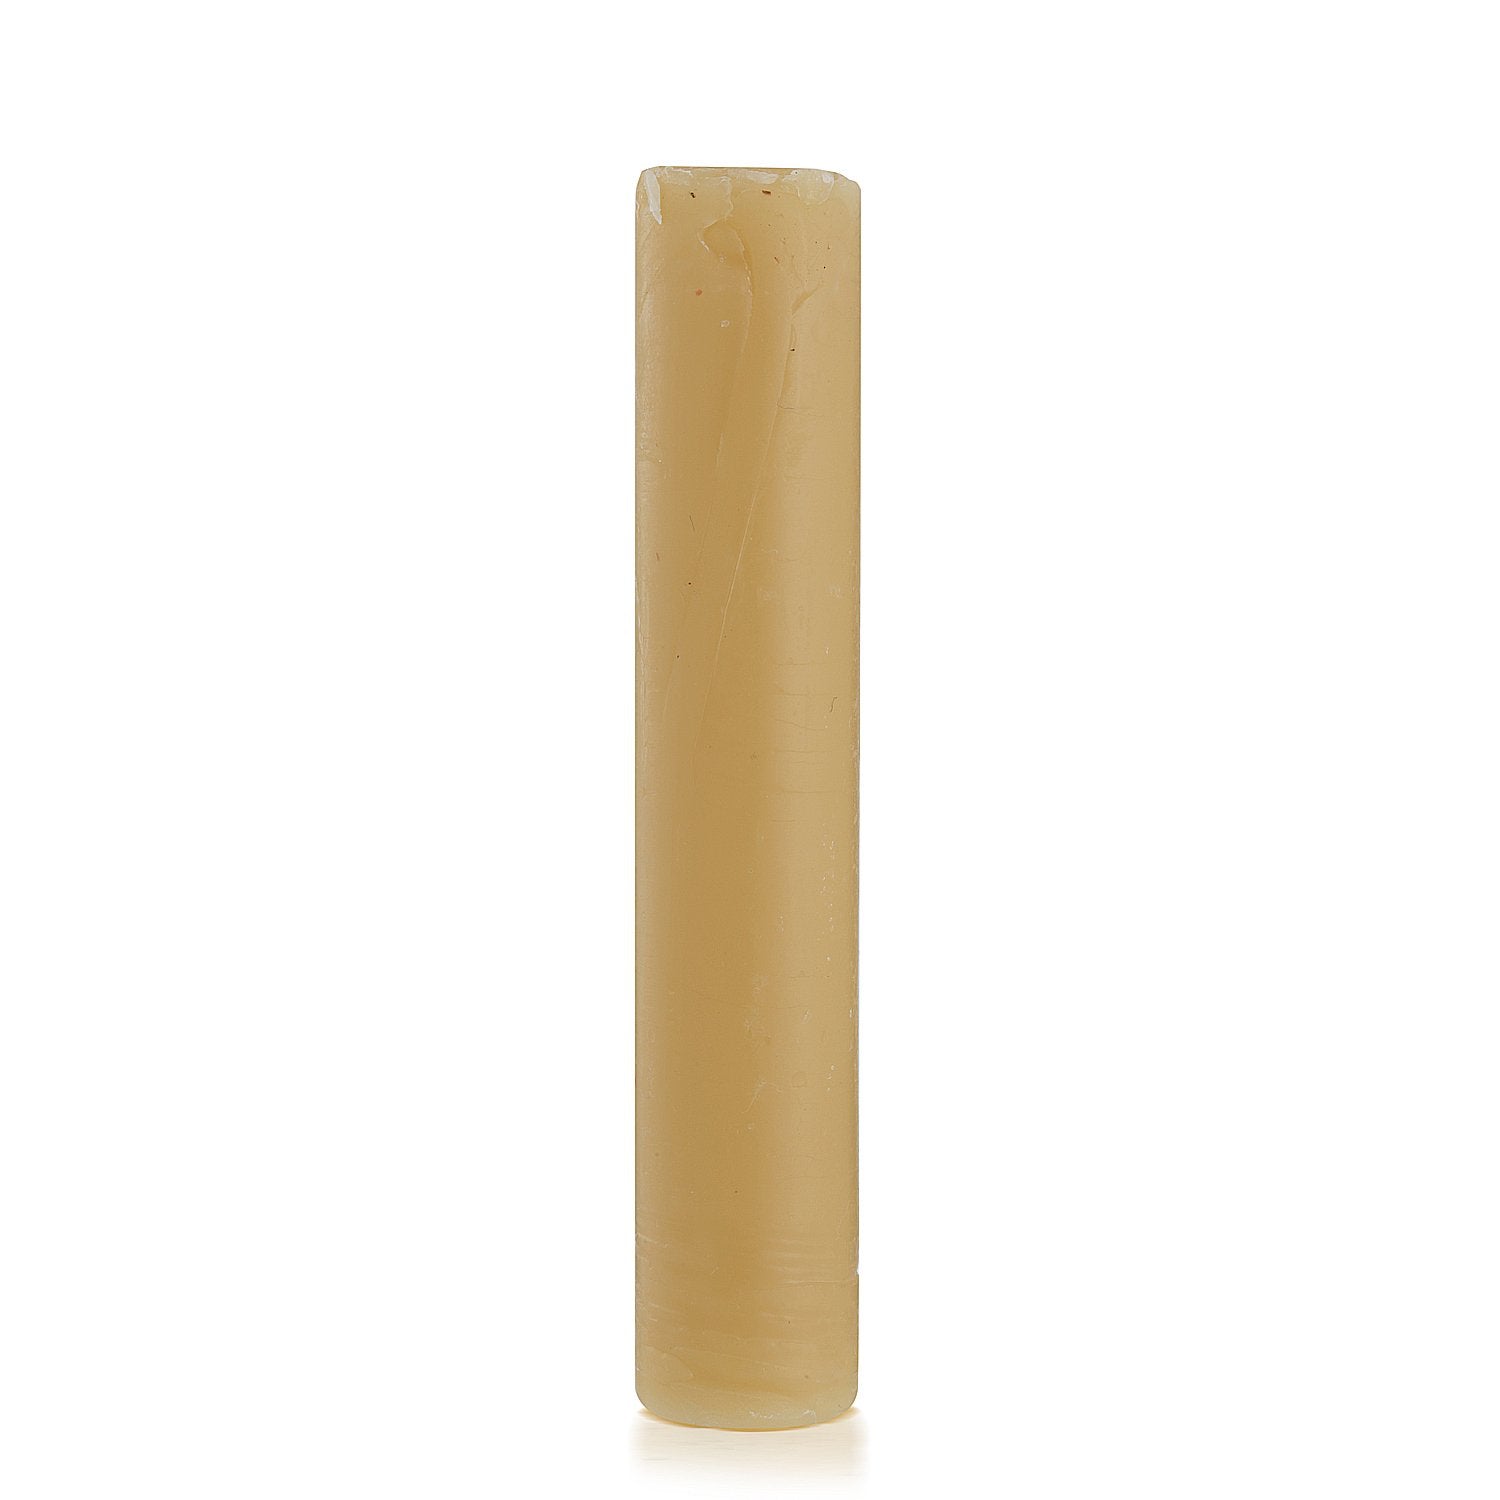 2Pce Pale Brown Beeswax Filler Sticks BFSPALE2 by Gilly's